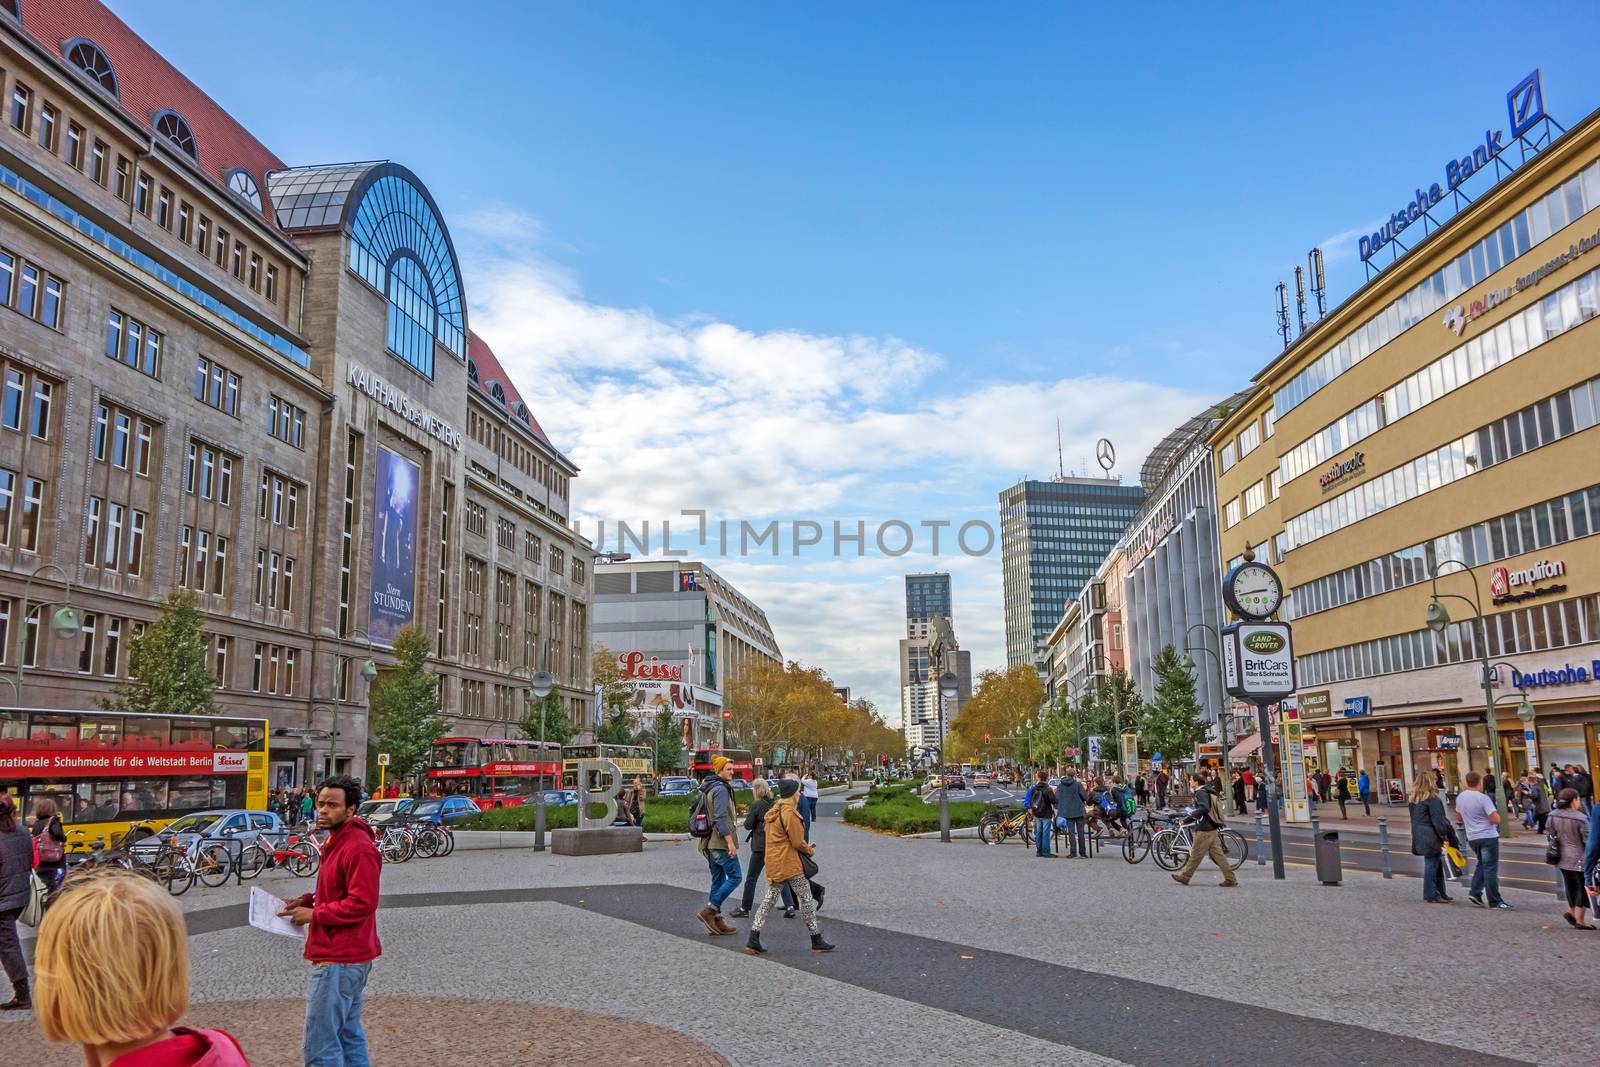 Berlin, Germany - October 27, 2013: View from Wittenbergplatz square towards church Kaiser-Wilhelm-Ged�chtnis-Kirche - famous shopping mall KaDeWe on the left.